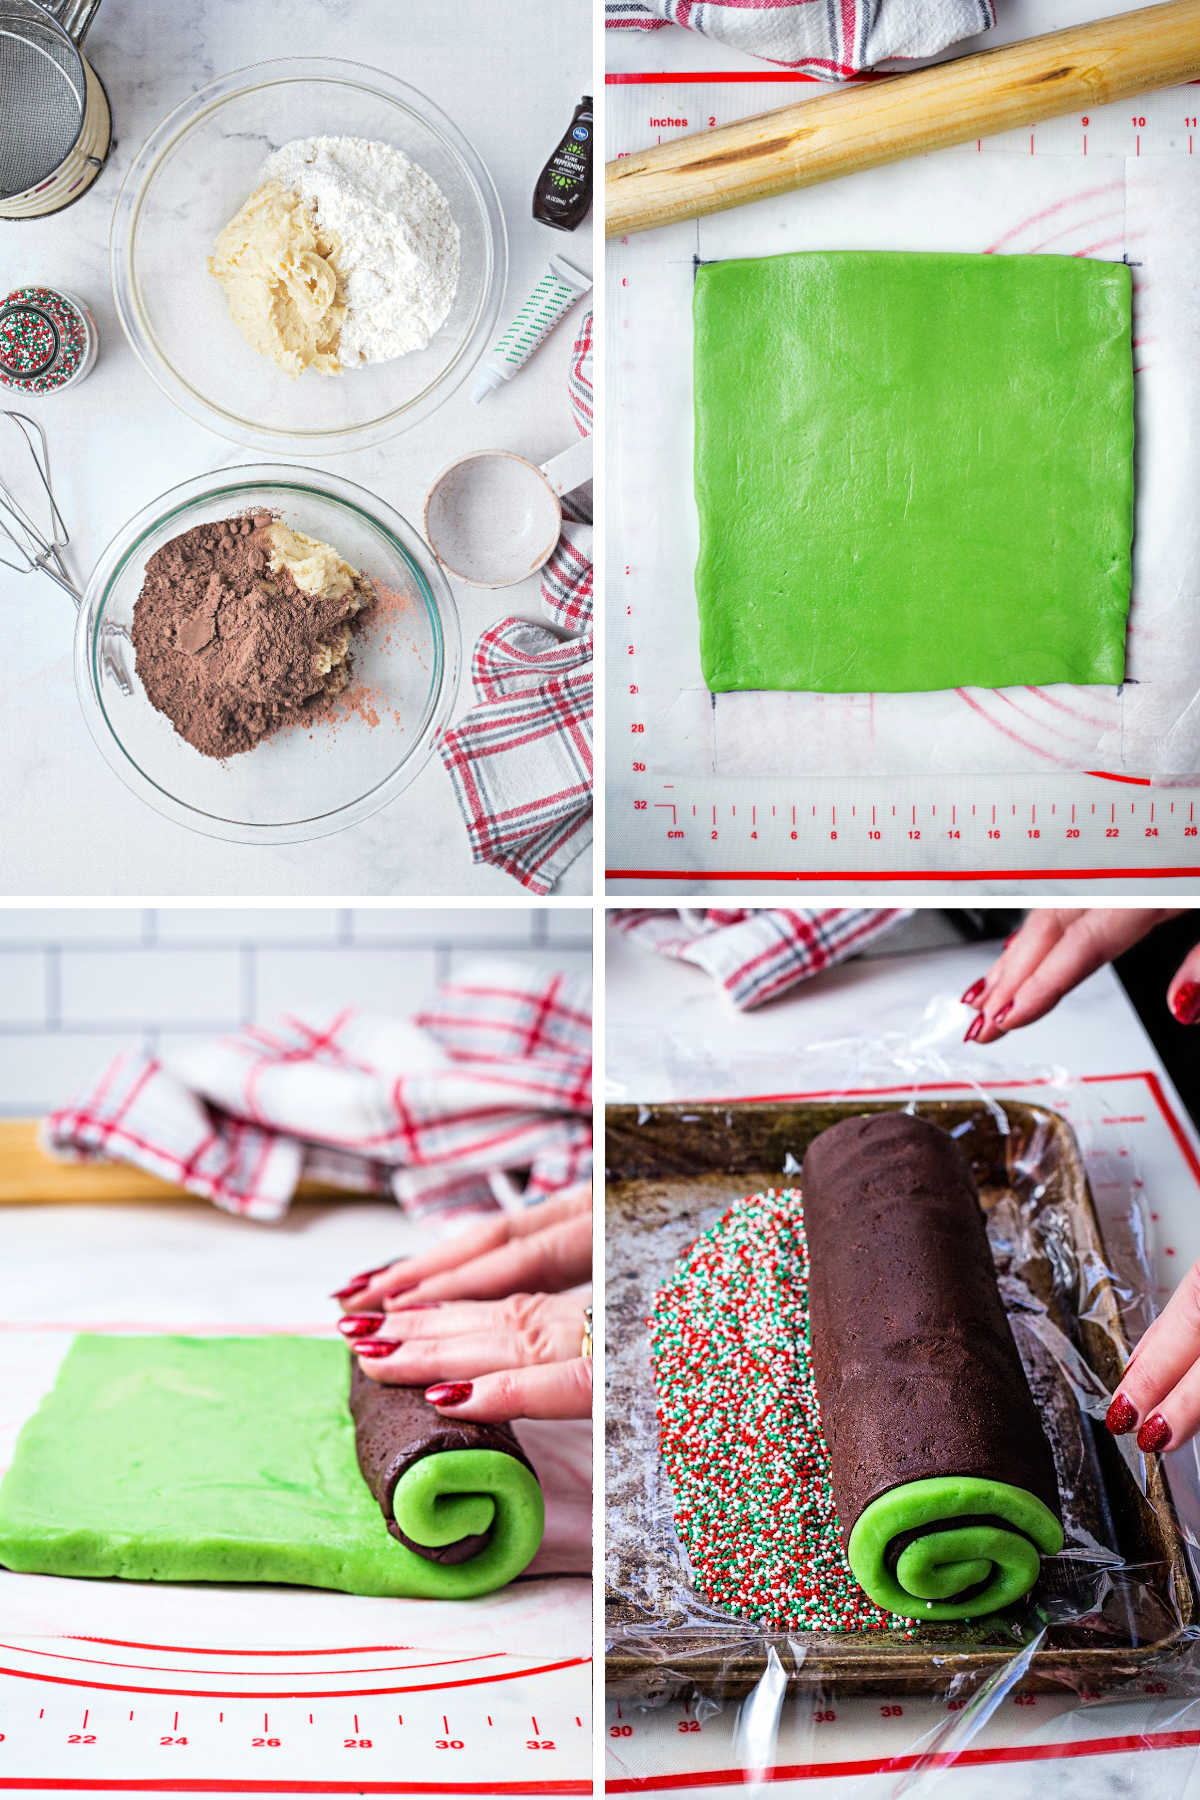 process steps for making dough for chocolate mint pinwheels; divide dough in half; roll each into a square; stack mint layer on top of the chocolate layer; roll up like a jellyroll.